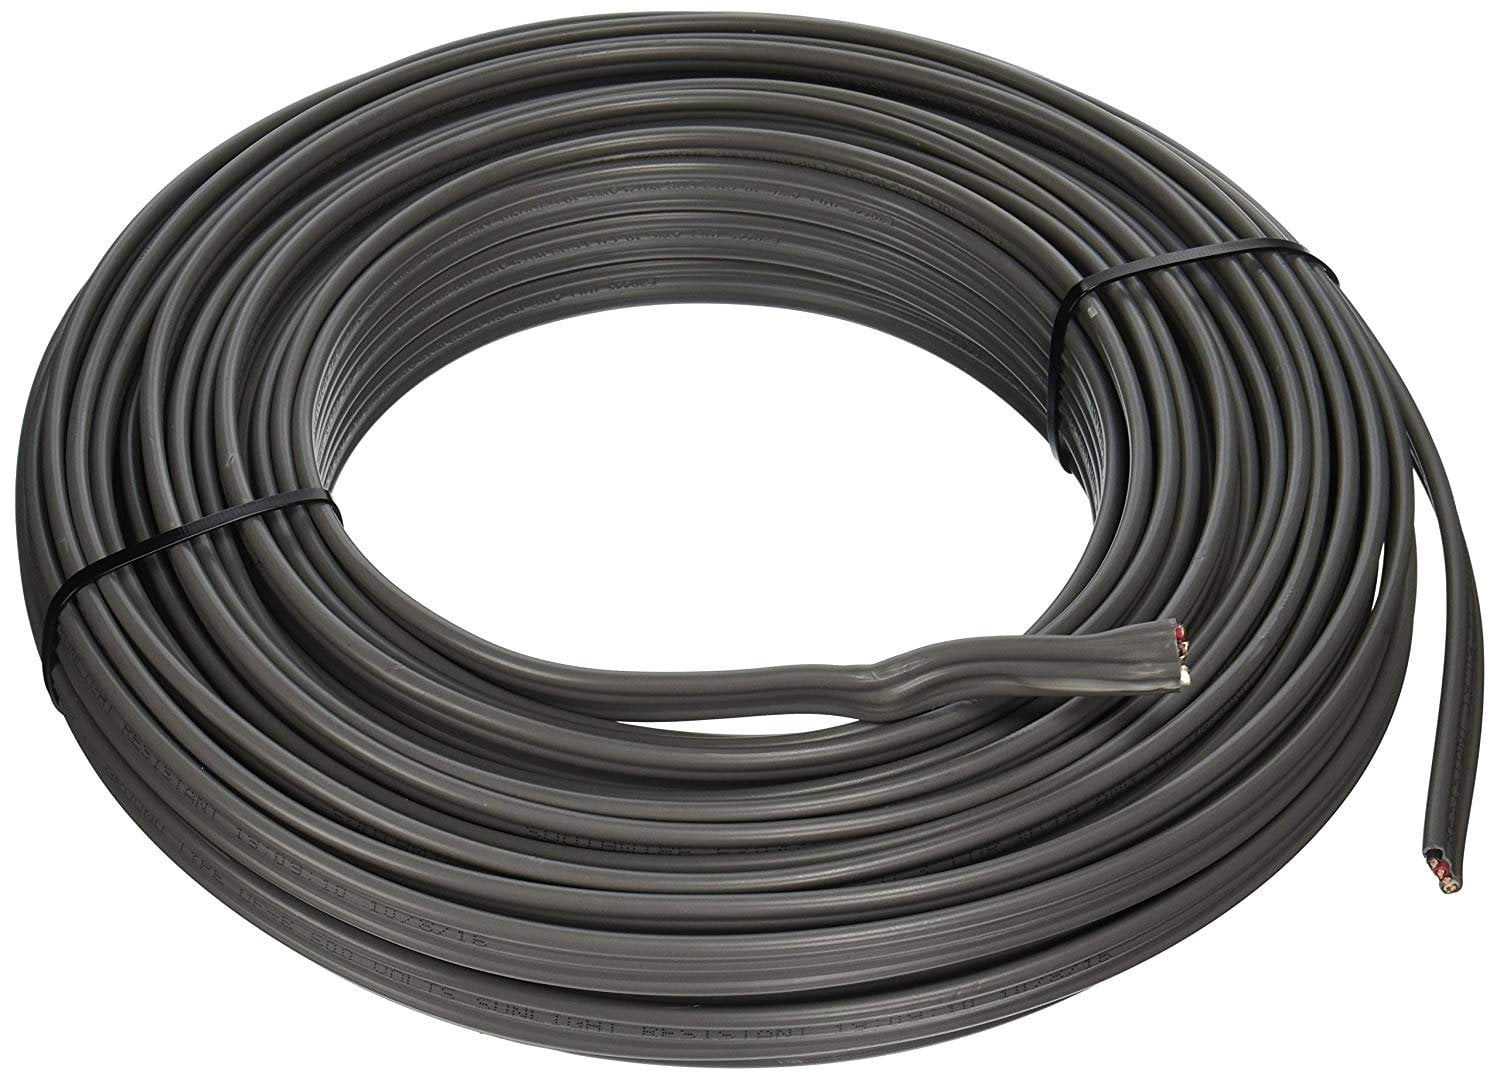 600V Electrical Copper Wire 100ft Underground Burial Gray Cable UF-B 10/2 Gauge 